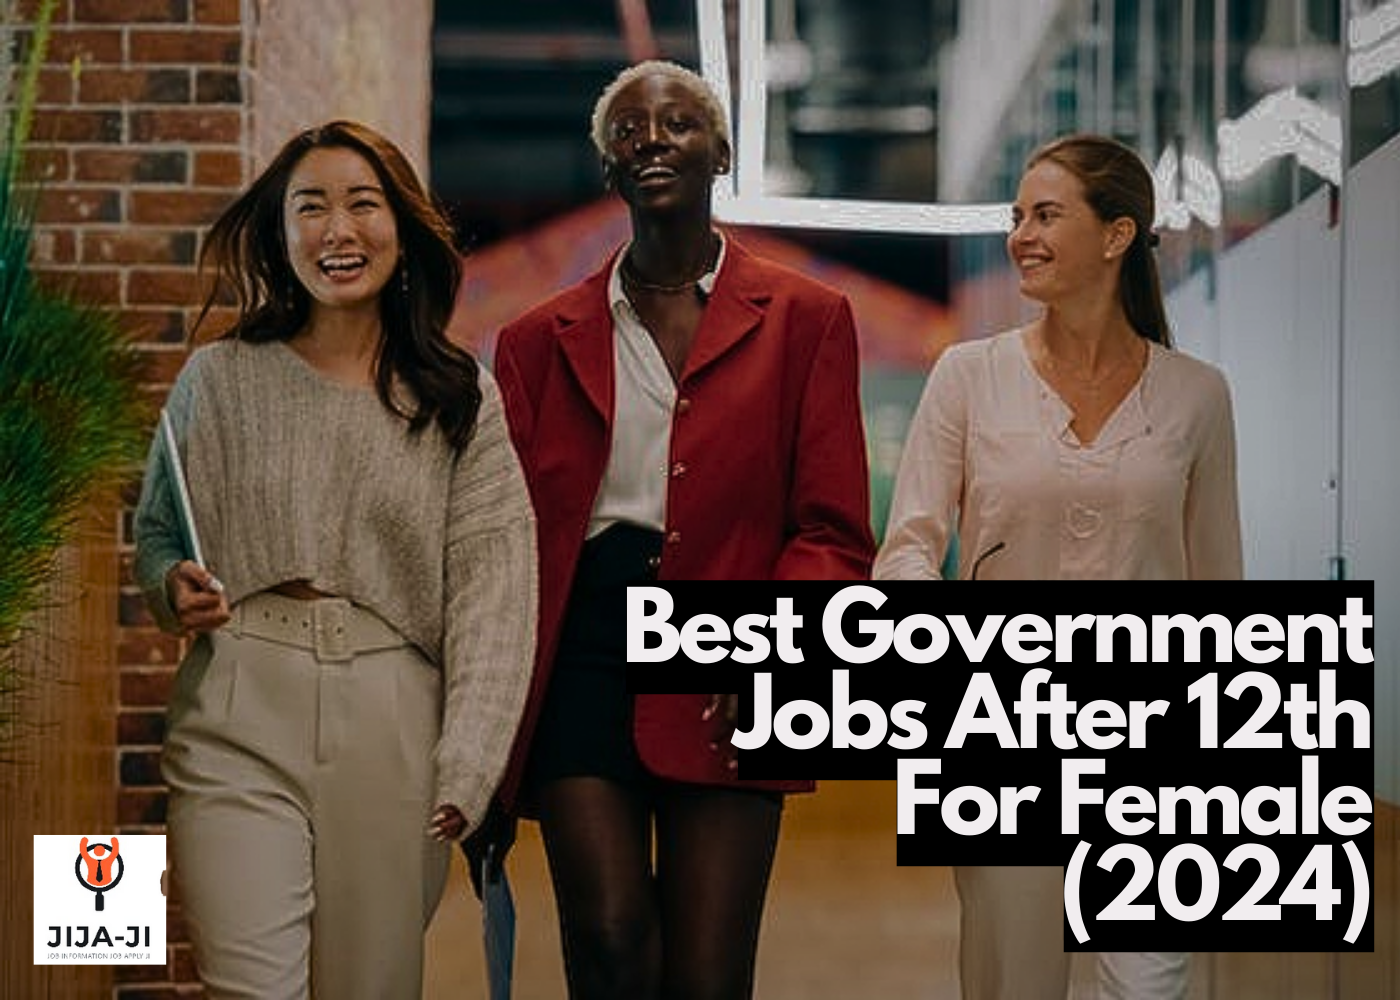 Best Government Jobs After 12th For Female (2024)